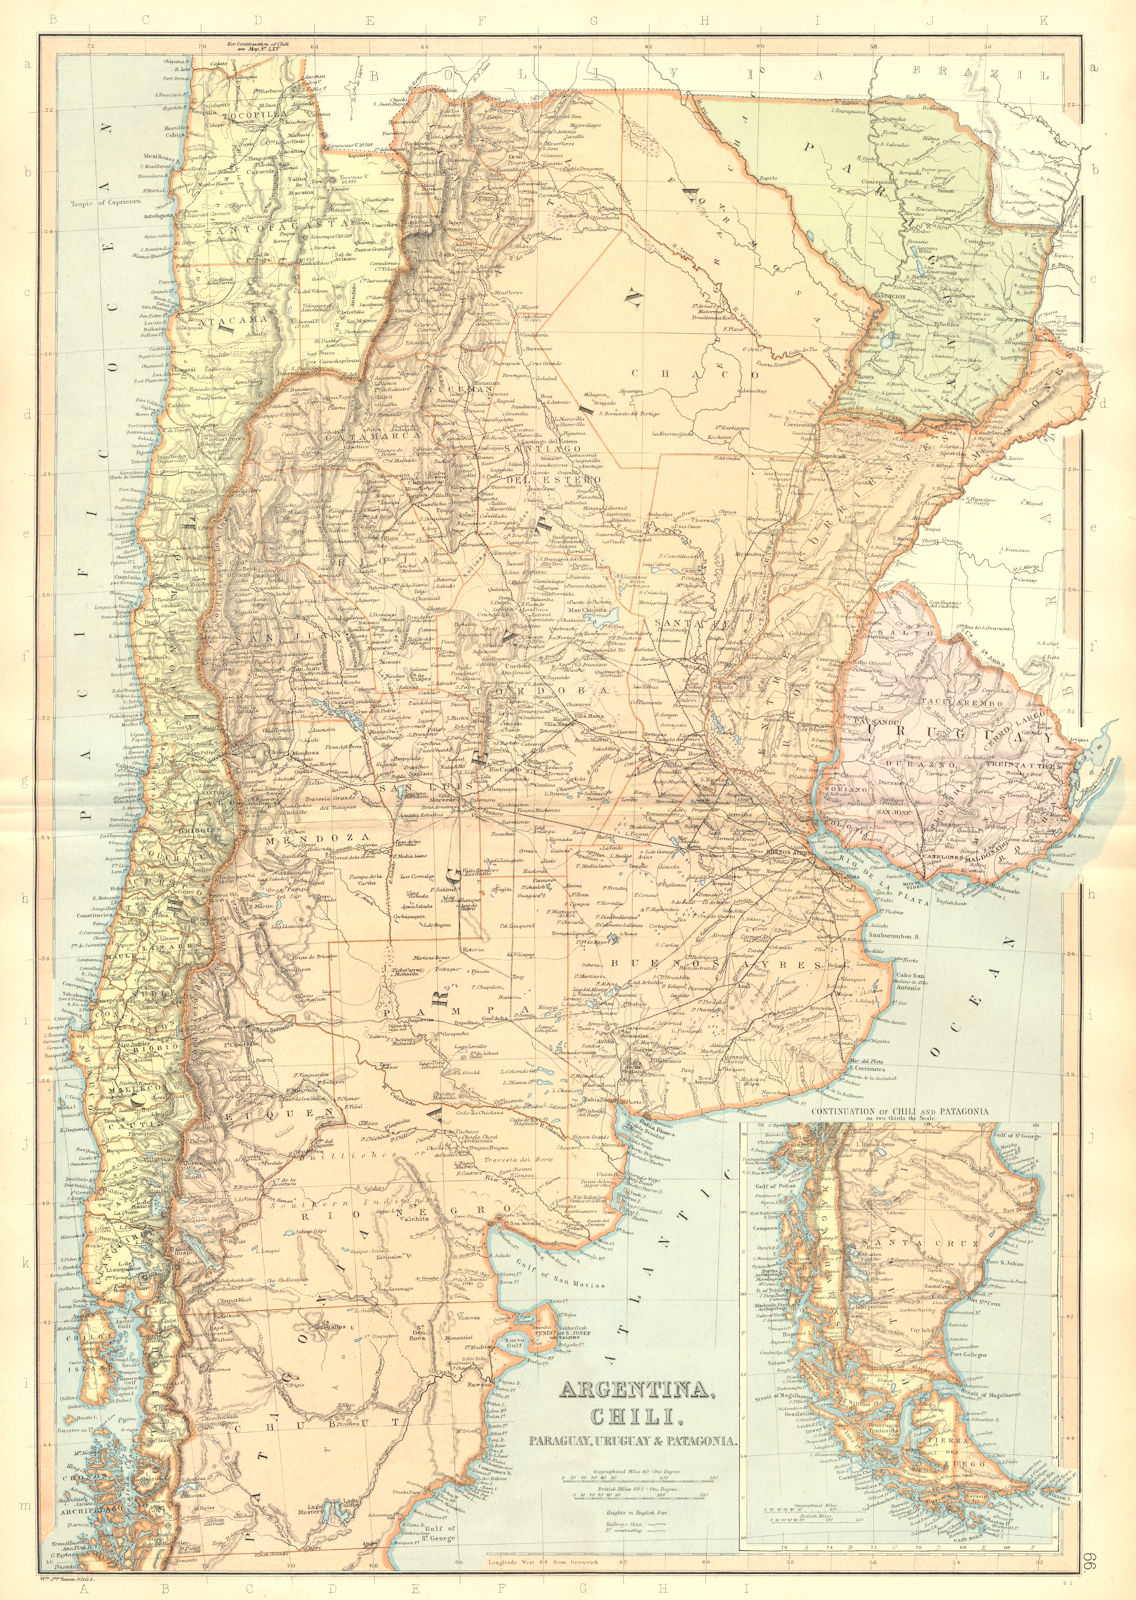 Associate Product ARGENTINA CHILE PARAGUAY URUGUAY. Railways. Patagonia. BLACKIE 1893 old map